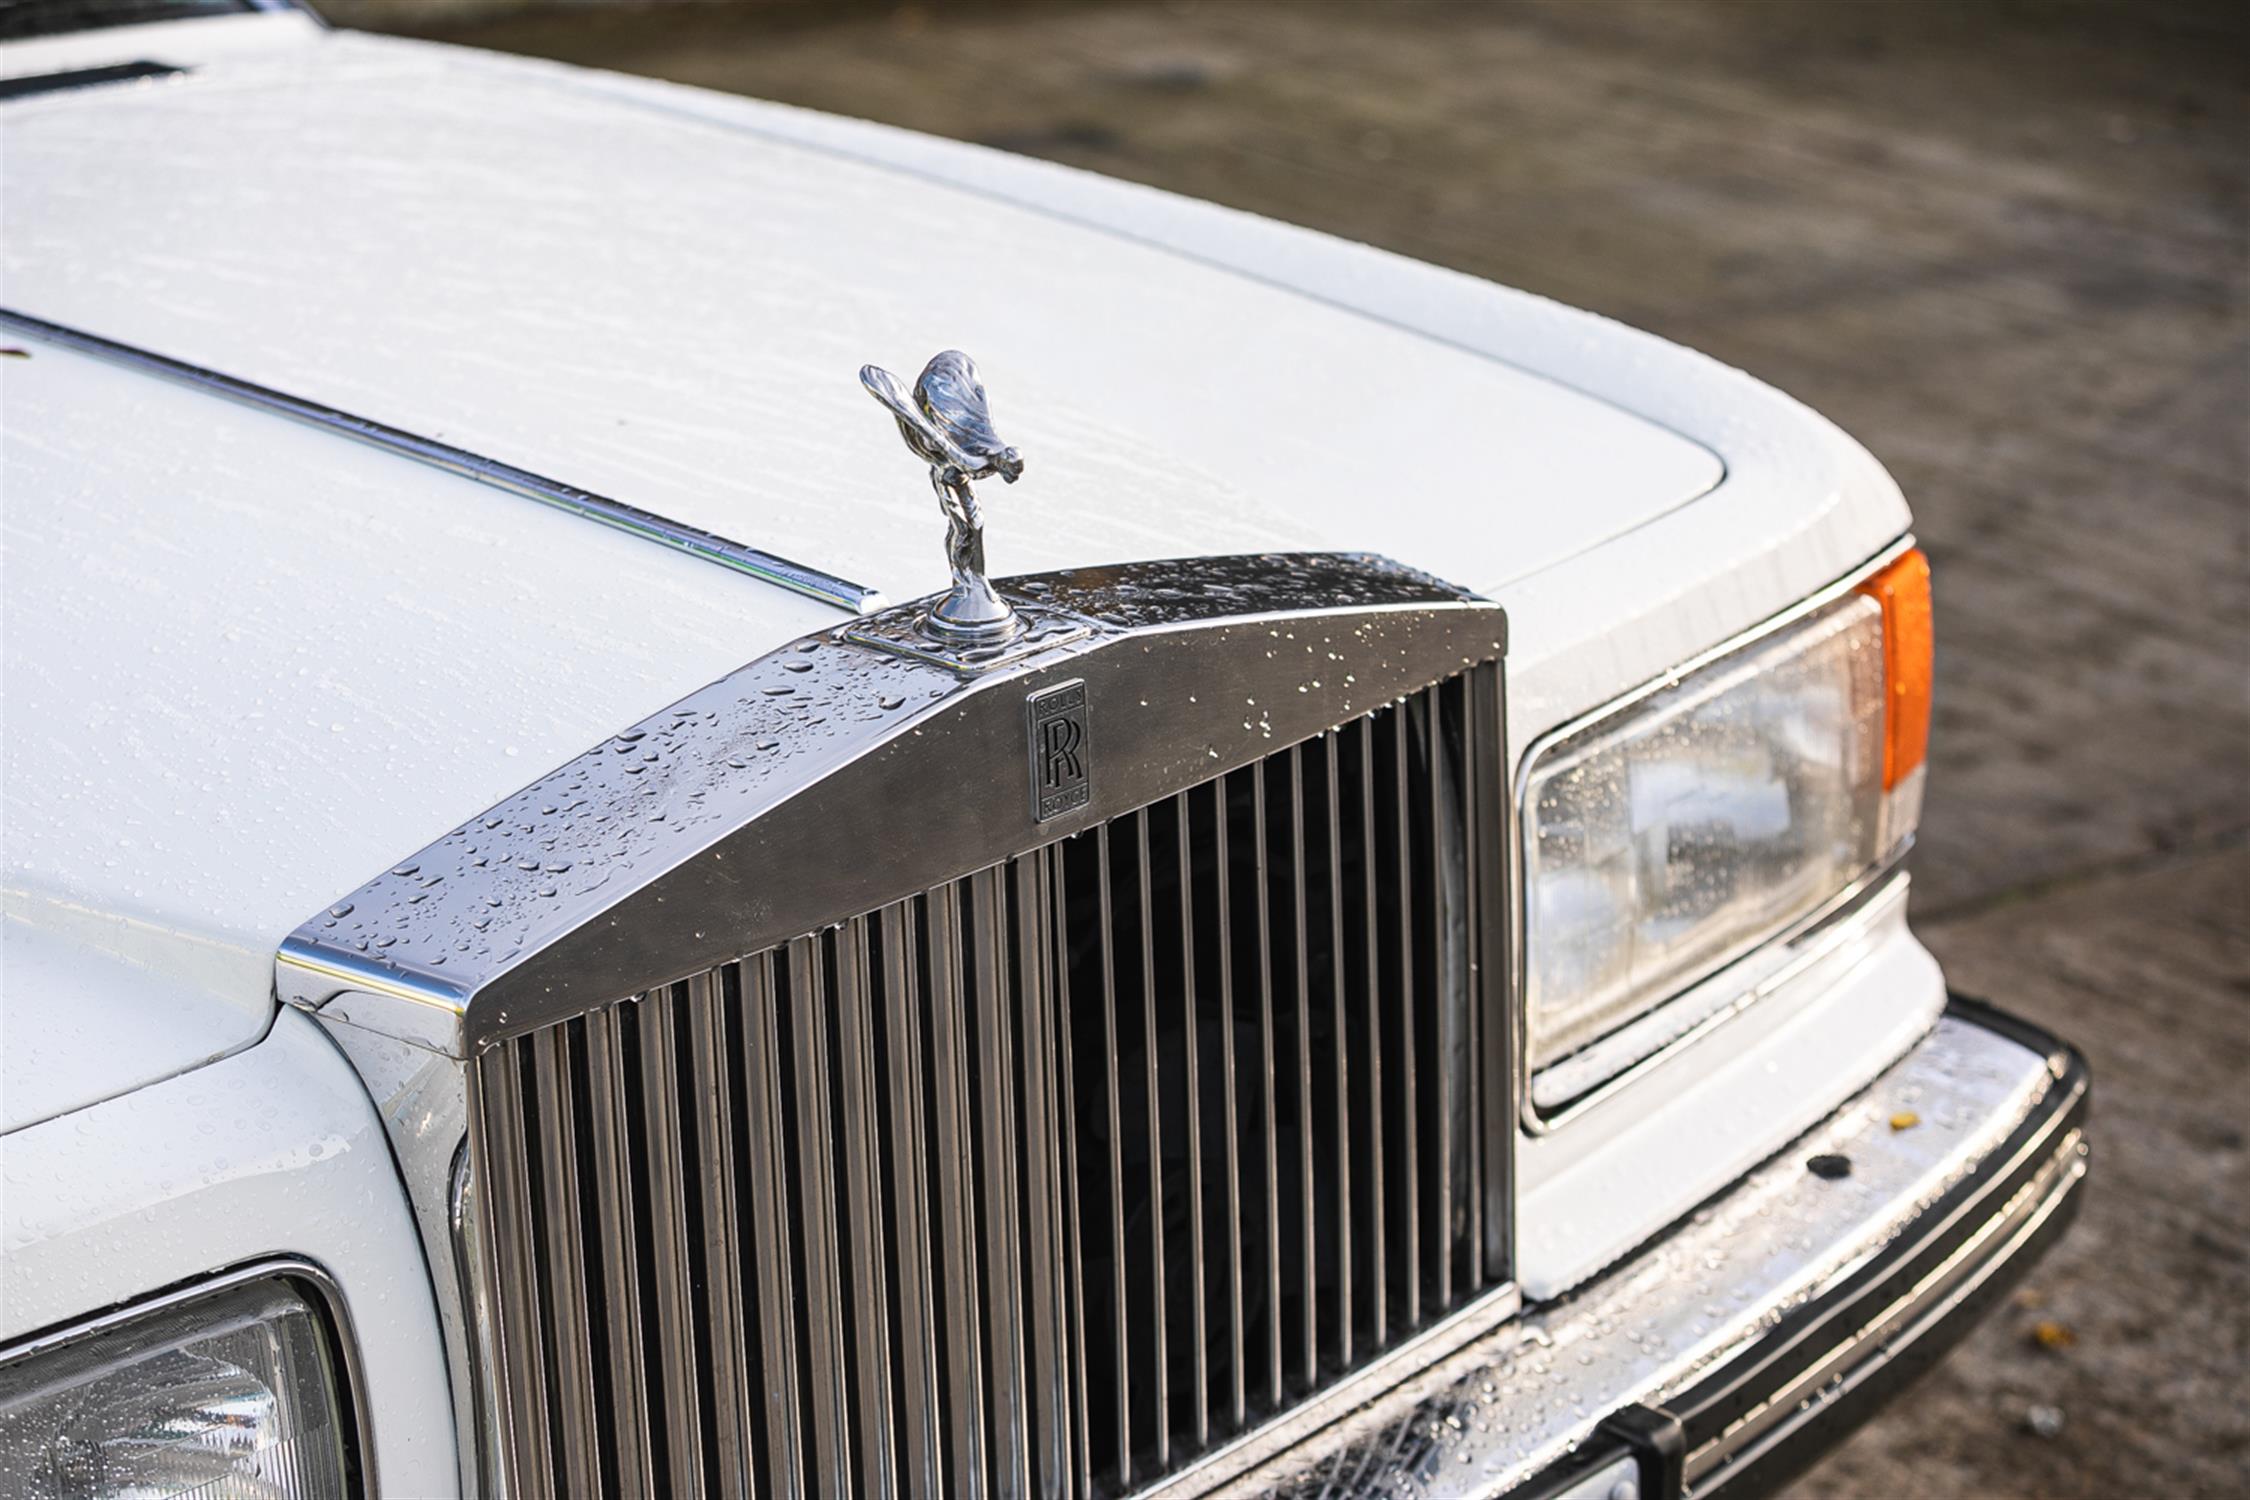 1985 Rolls-Royce Silver Spirit - One Owner - Image 8 of 10